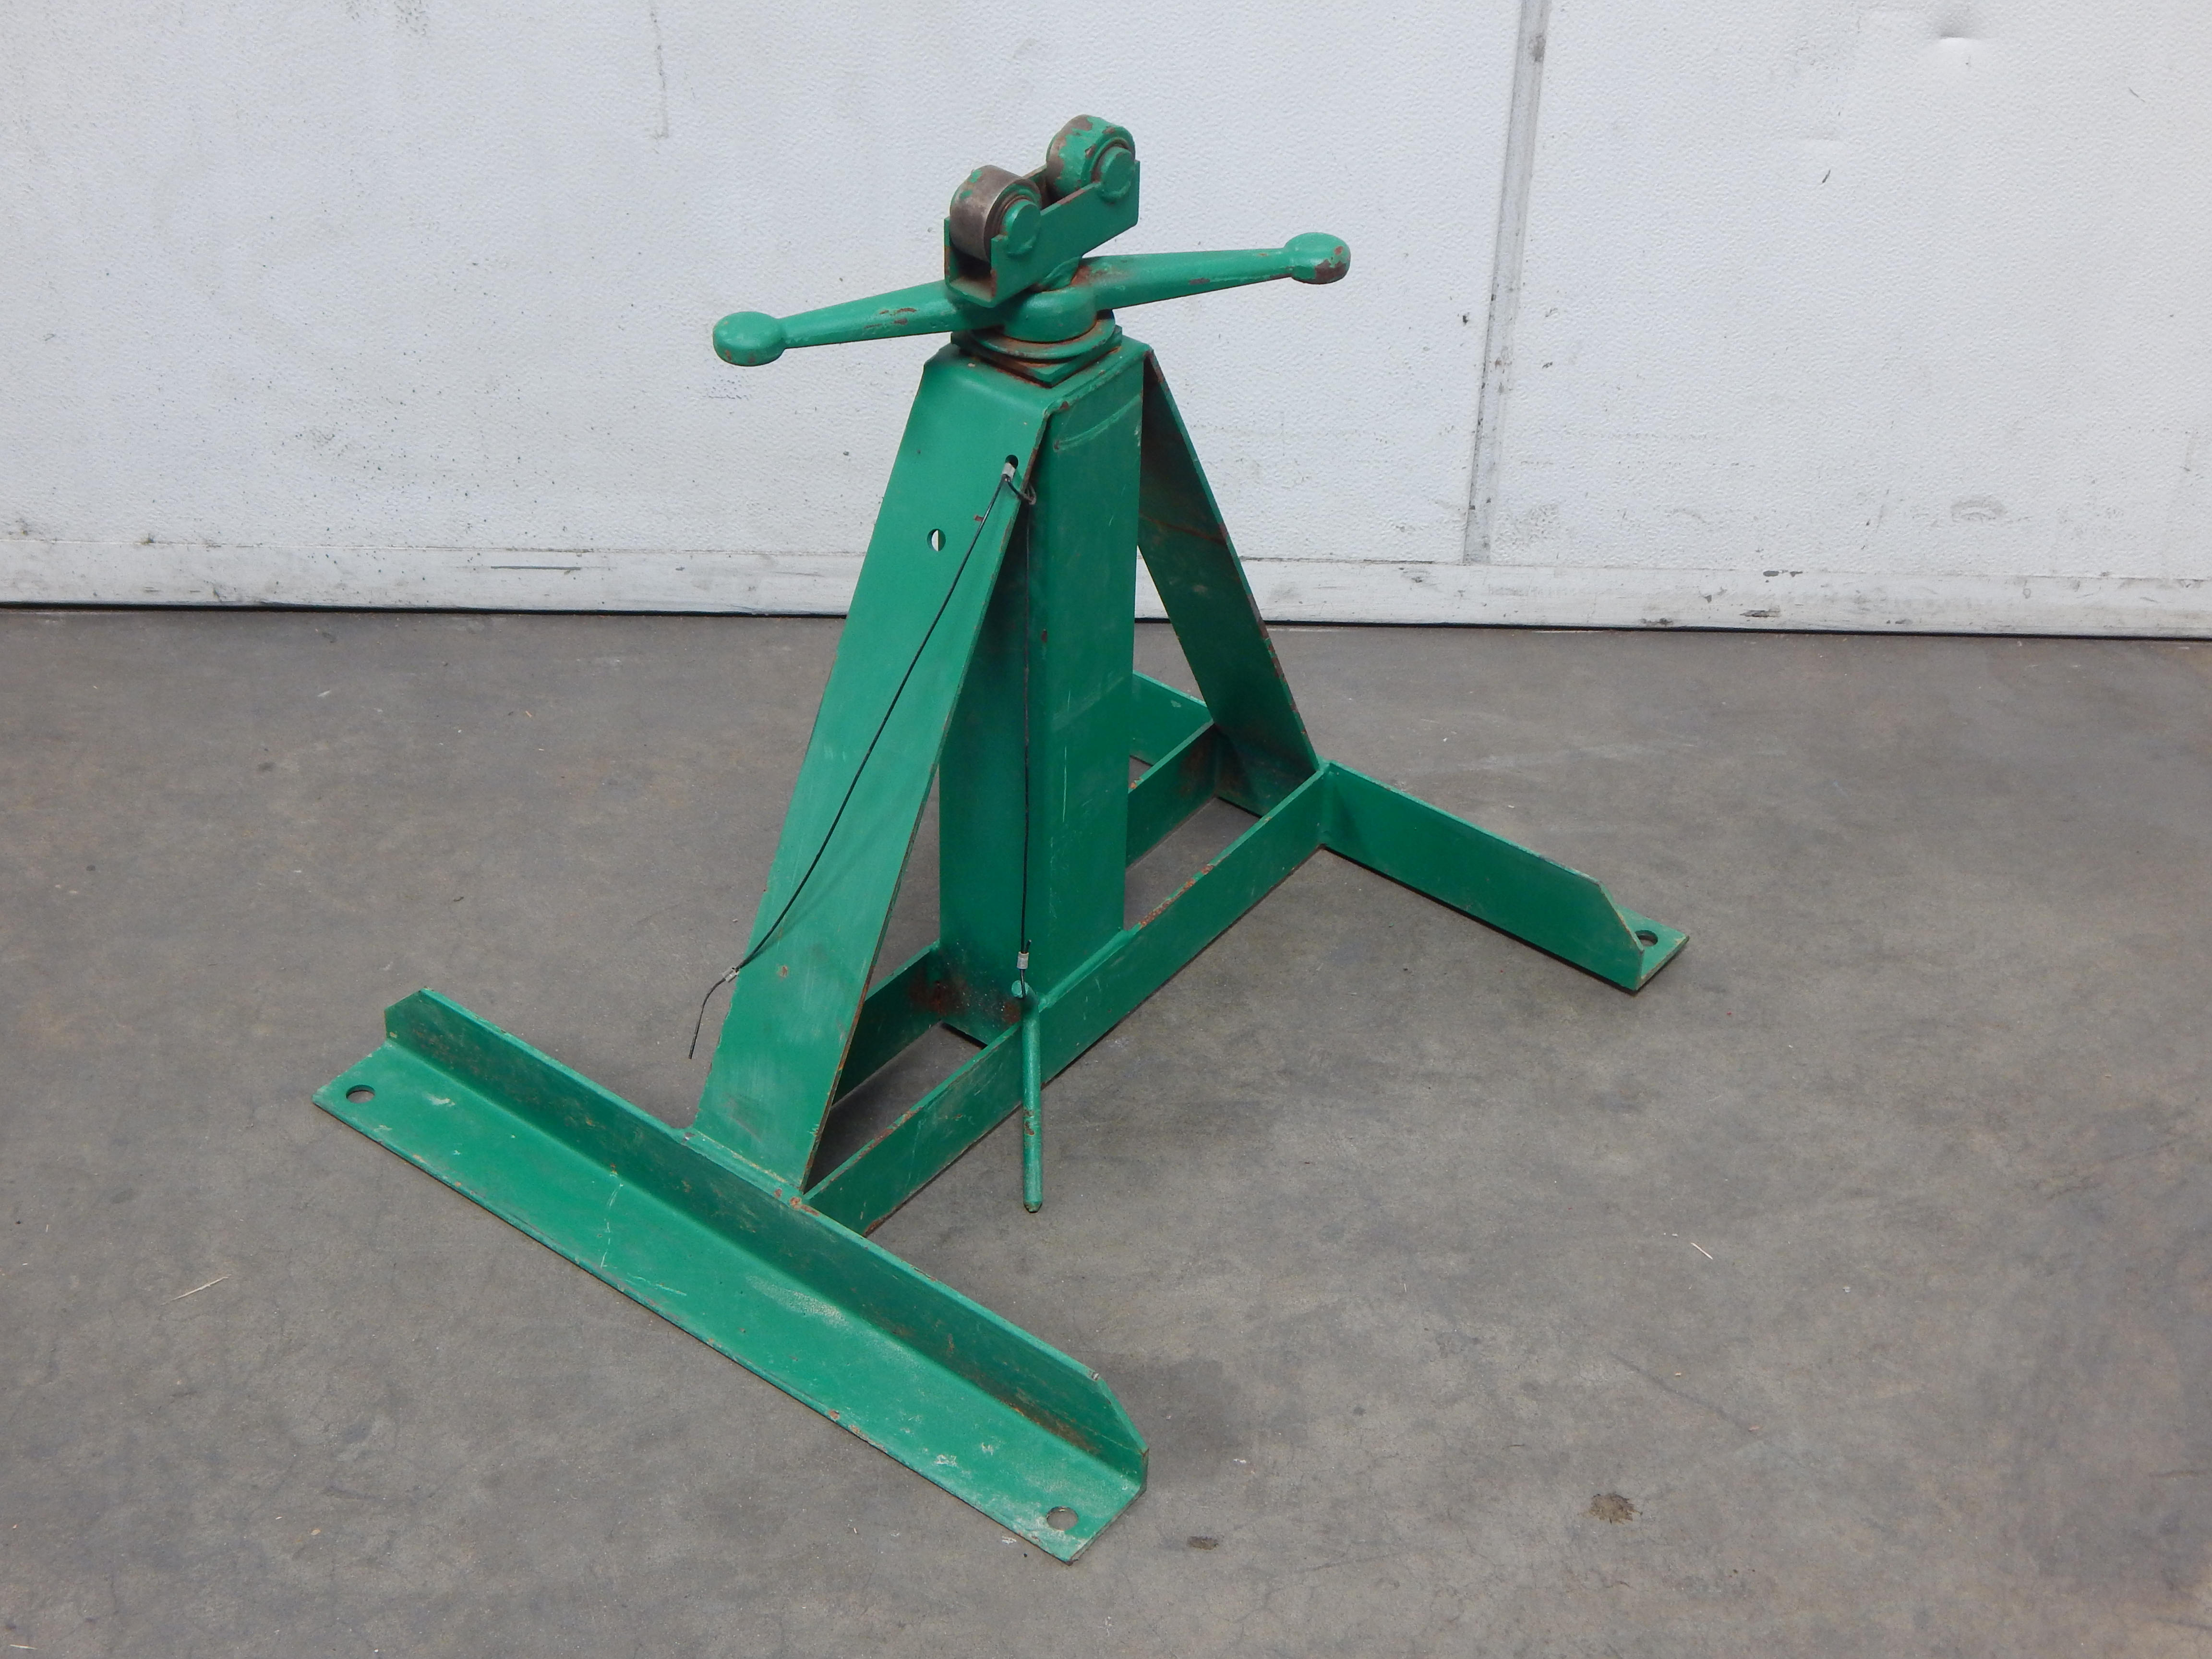 Cable Reel Stands - Crs 96HD - China Cable Reel Stand, Cable Pulling Cart